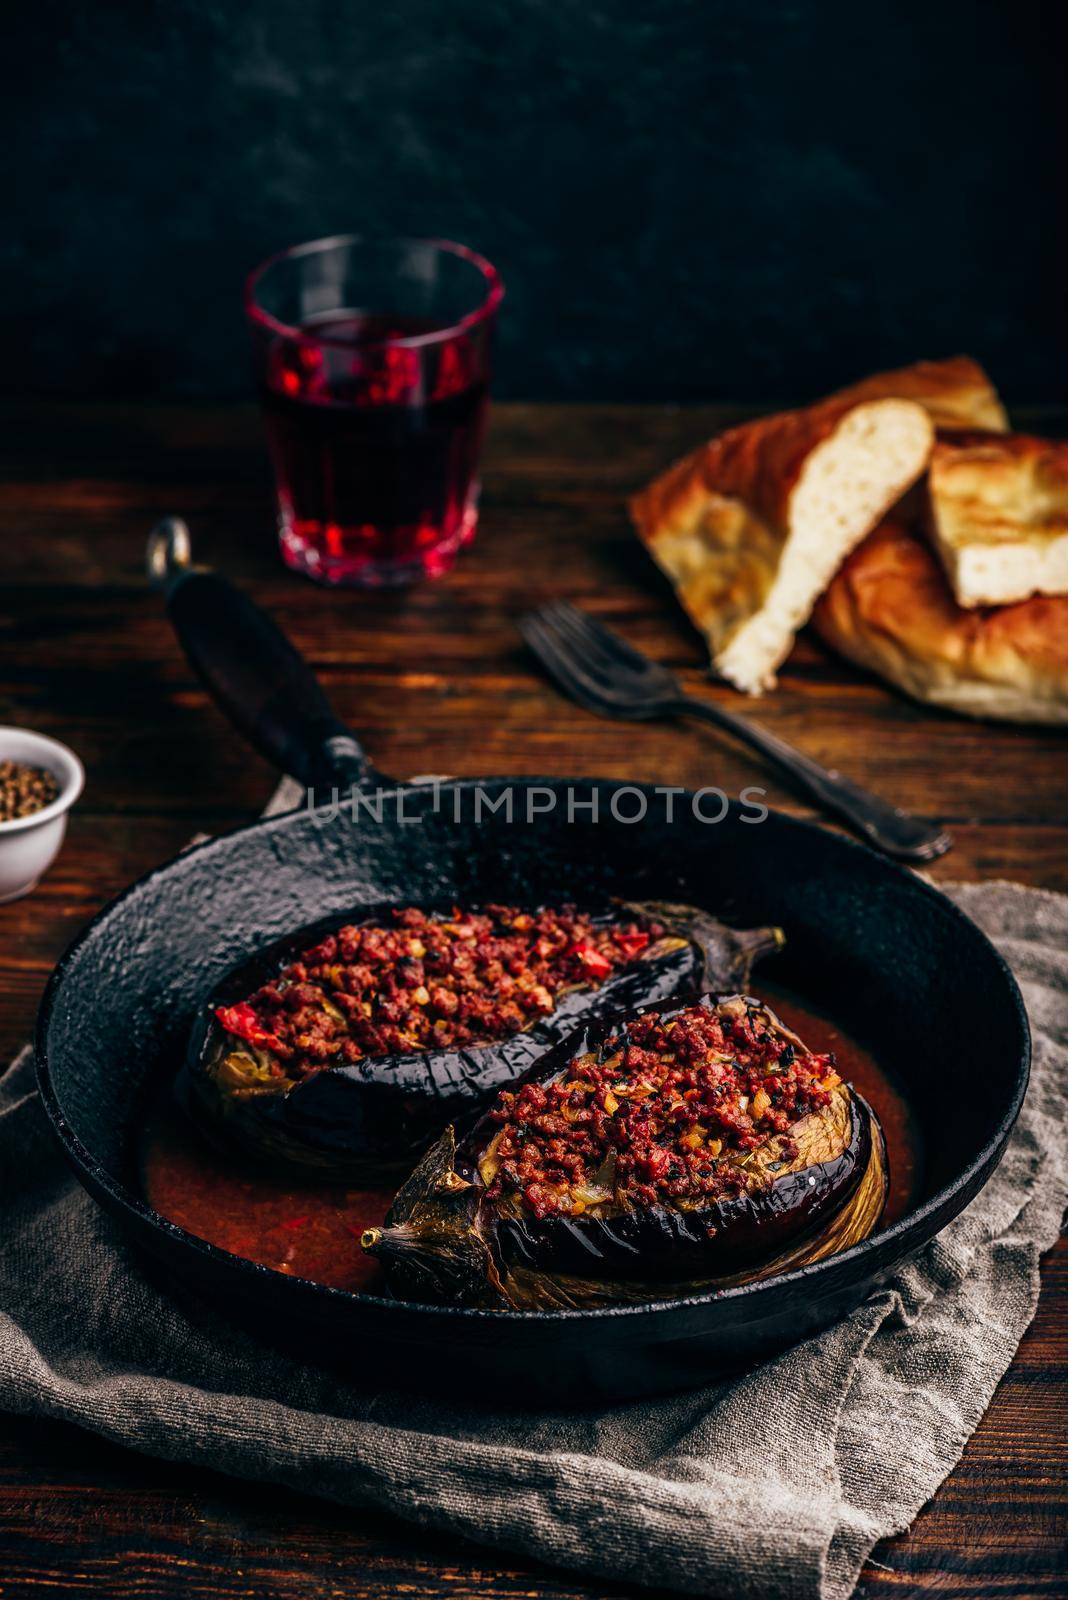 Eggplants stuffed with ground beef and tomatoes by Seva_blsv